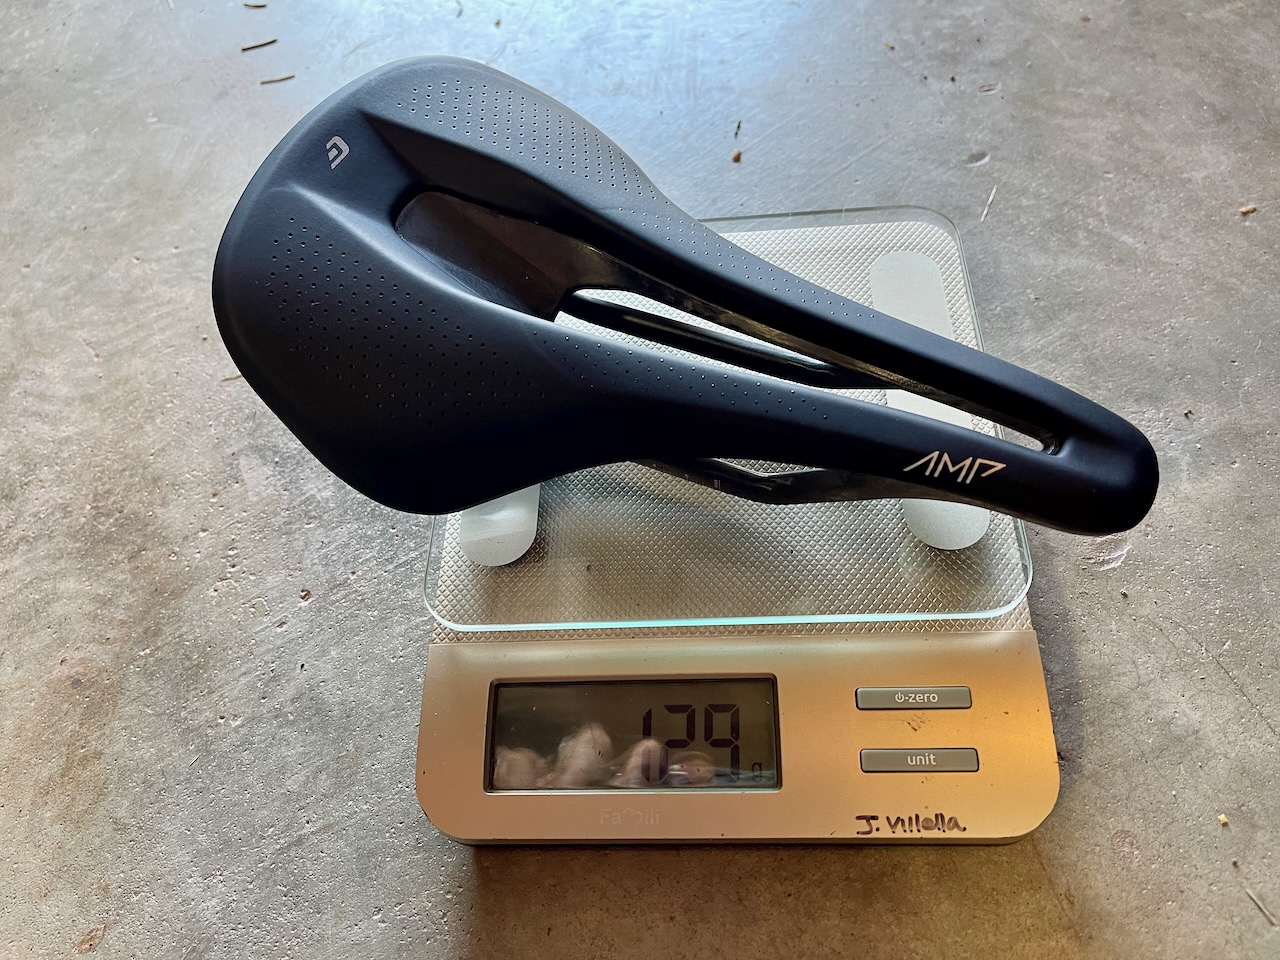 CADEX Amp saddle review weight